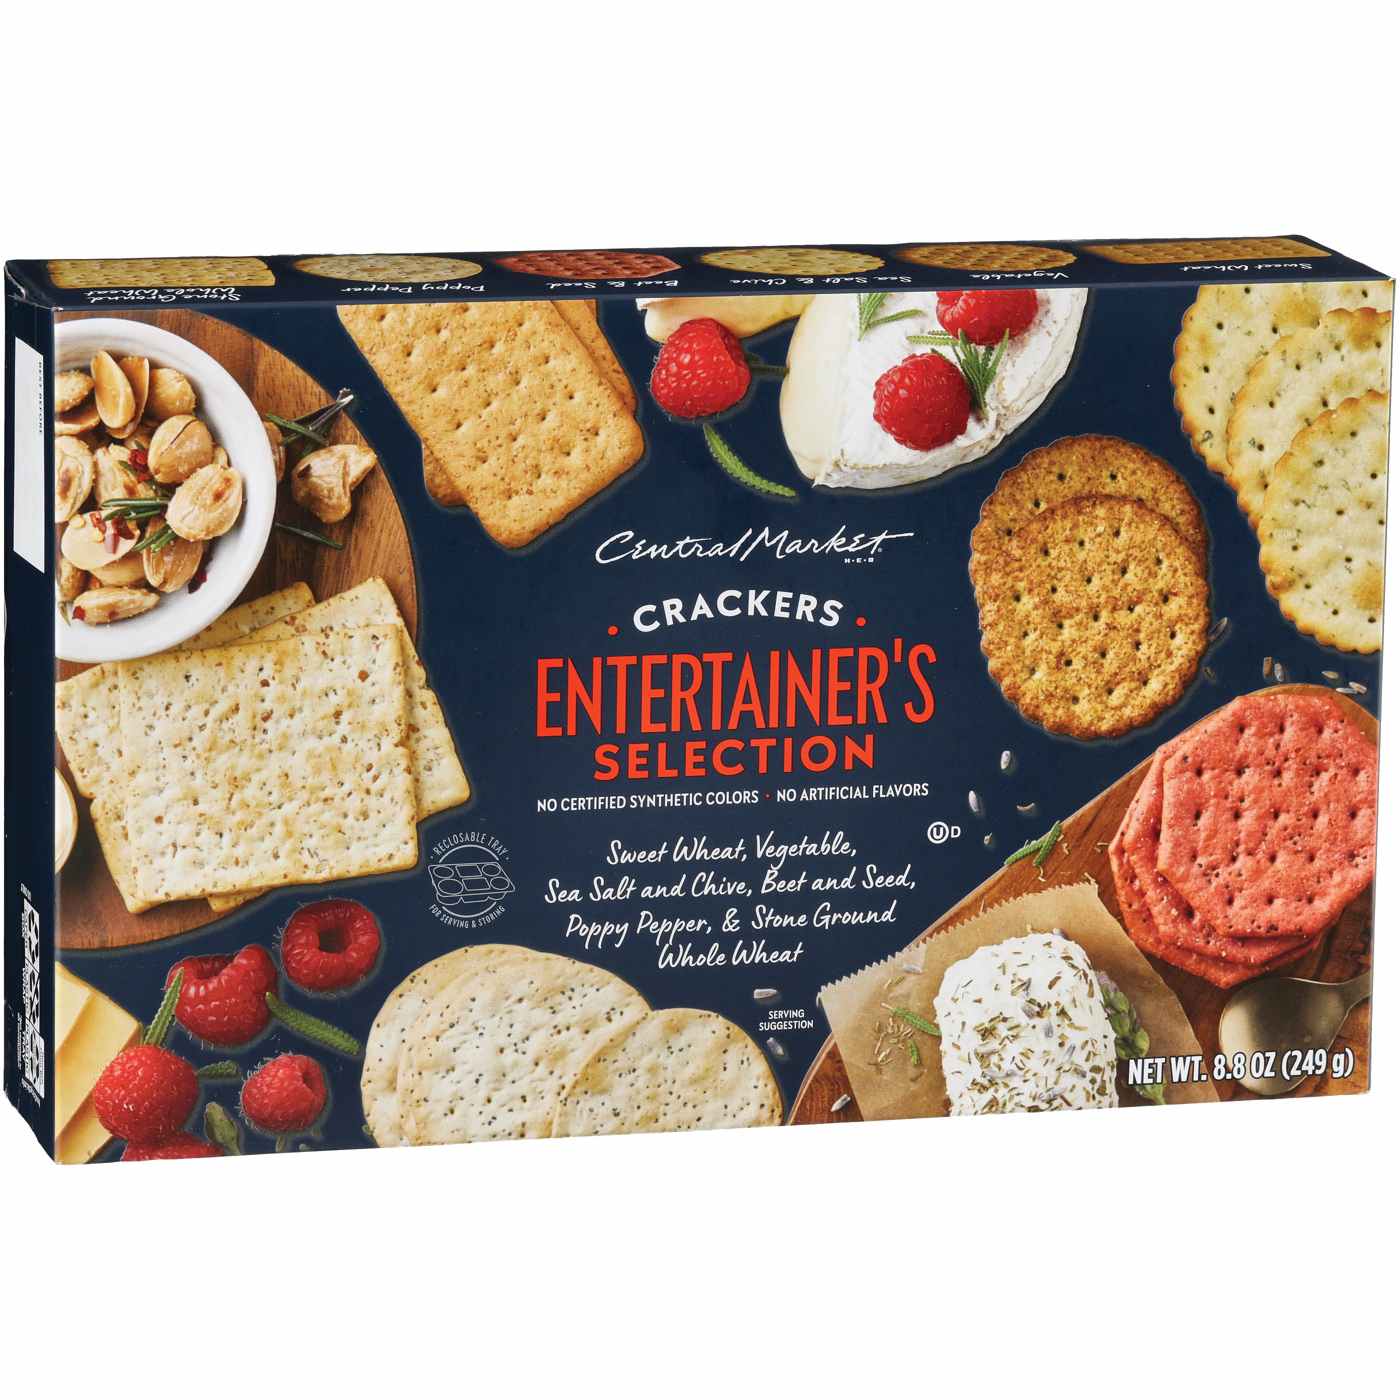 Central Market Entertainer's Selection Crackers; image 1 of 2